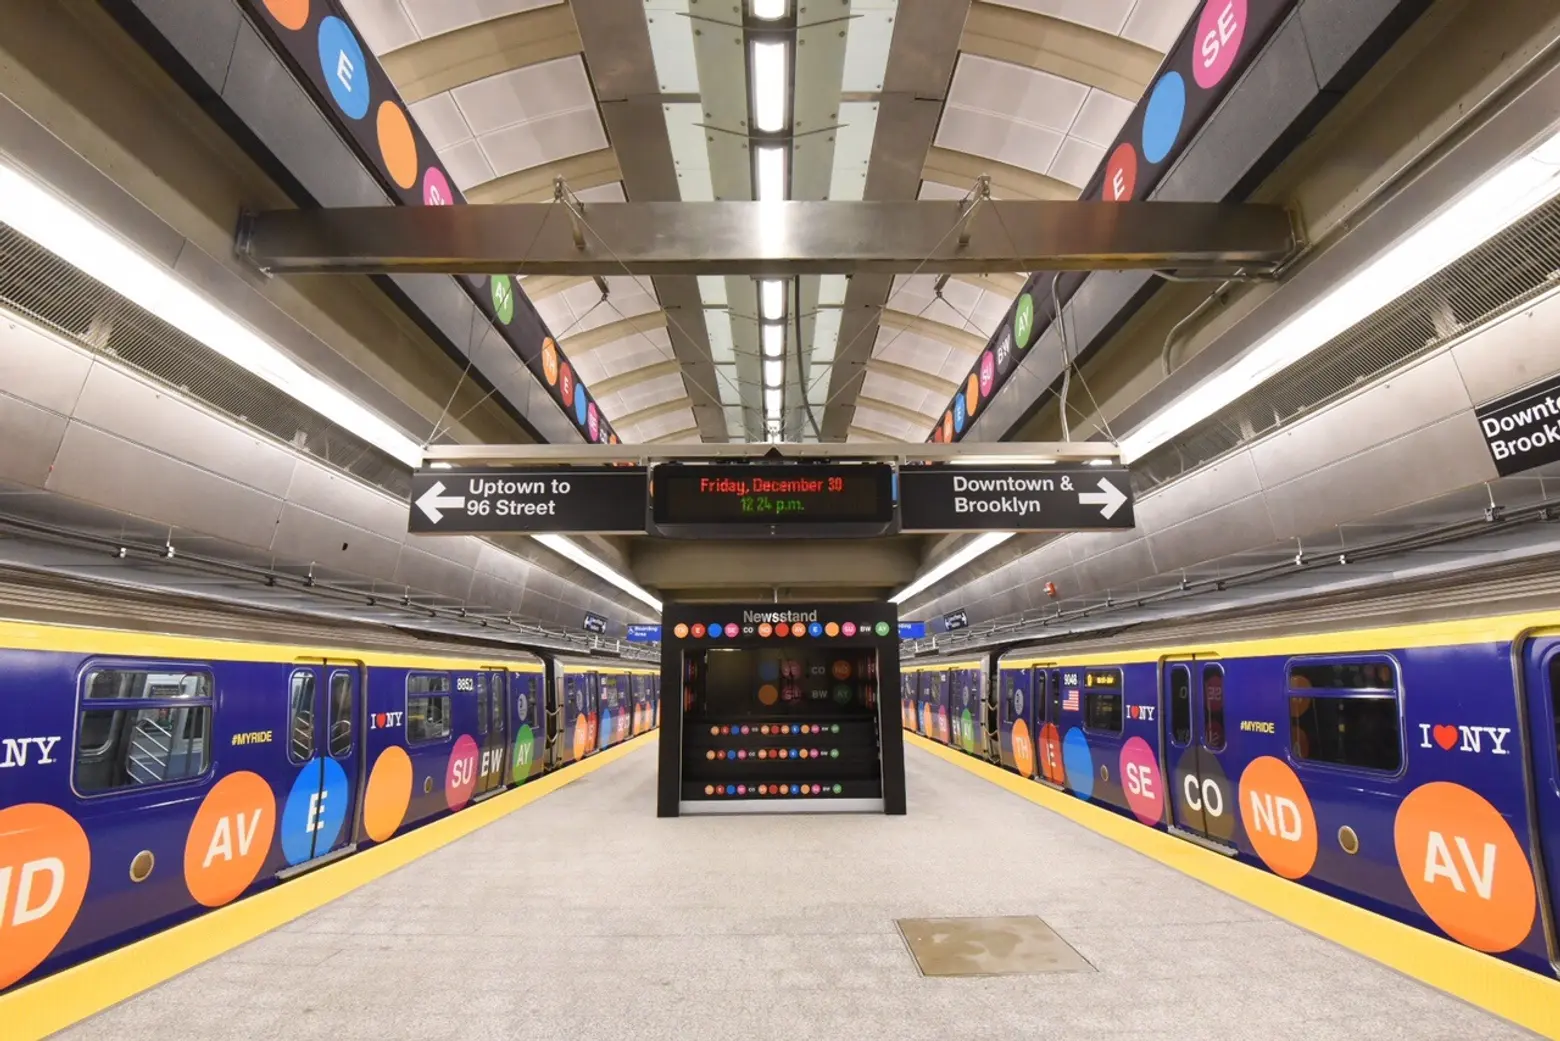 In just a month, Second Avenue Subway eases congestion on the Lexington Avenue line by 11 percent